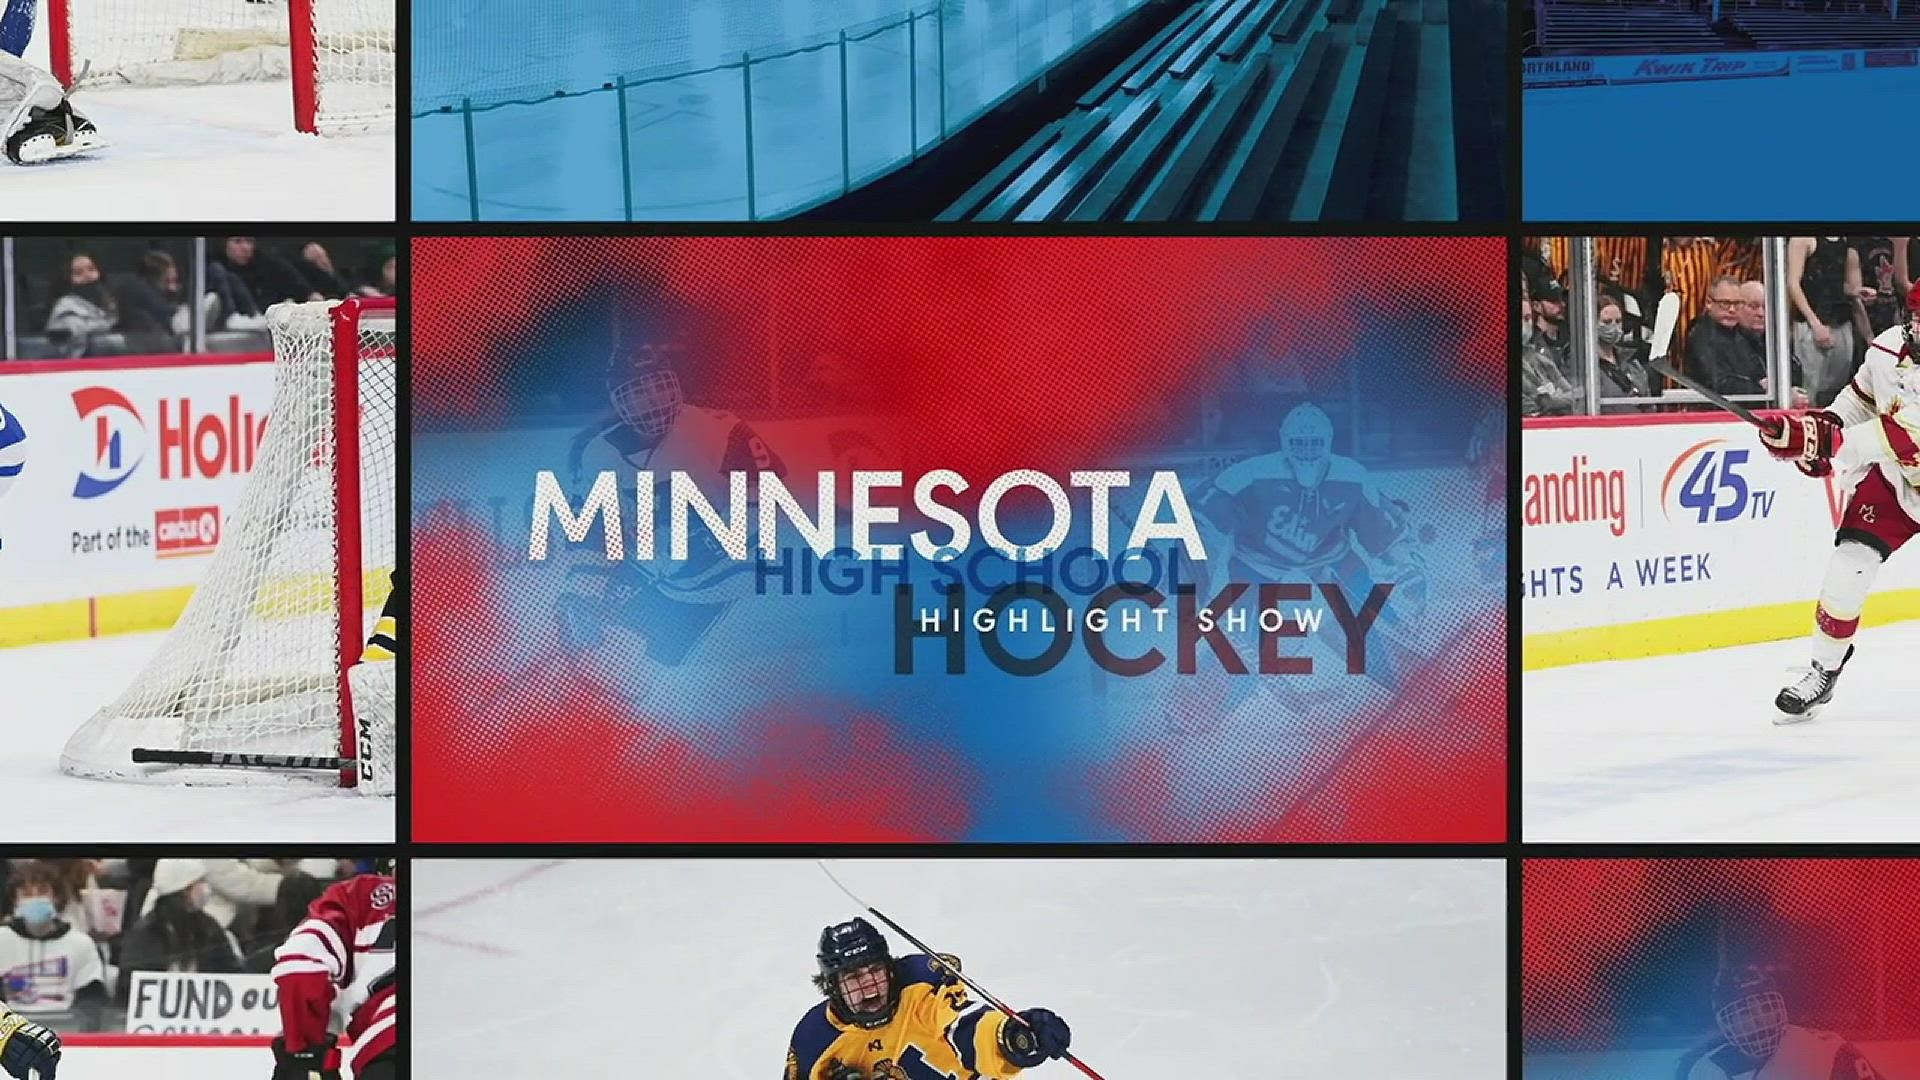 Catch up on the latest news around high school hockey in Minnesota with Inside the Bubble.